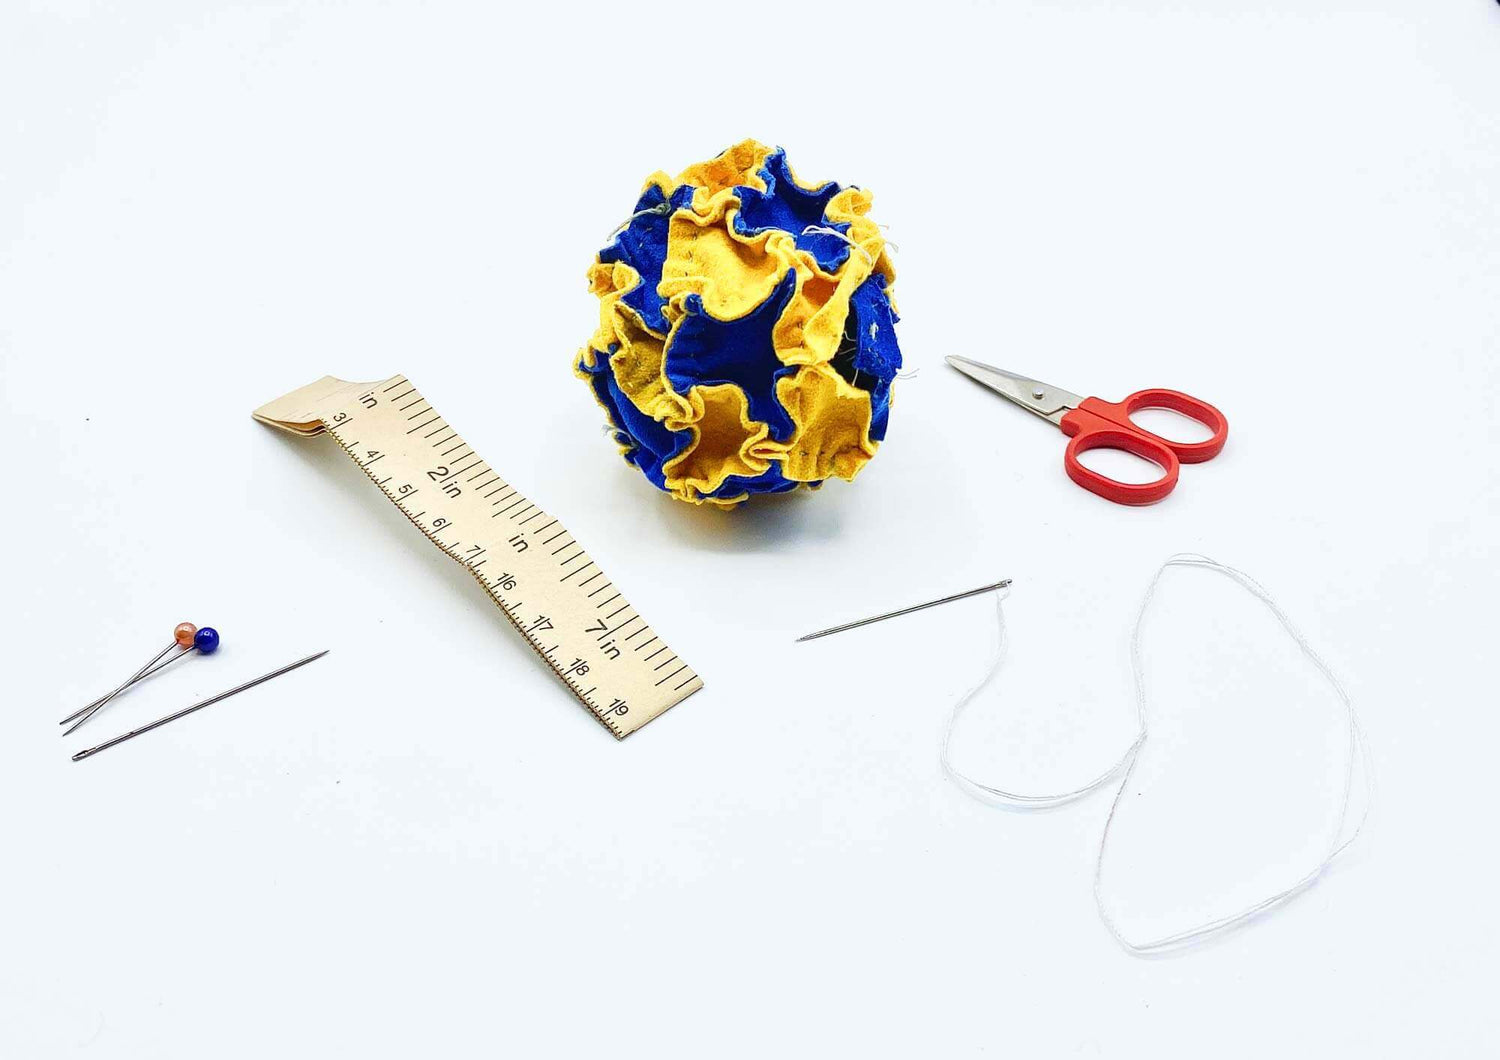 Stitching and sewing a footbag together, with needle and thread.